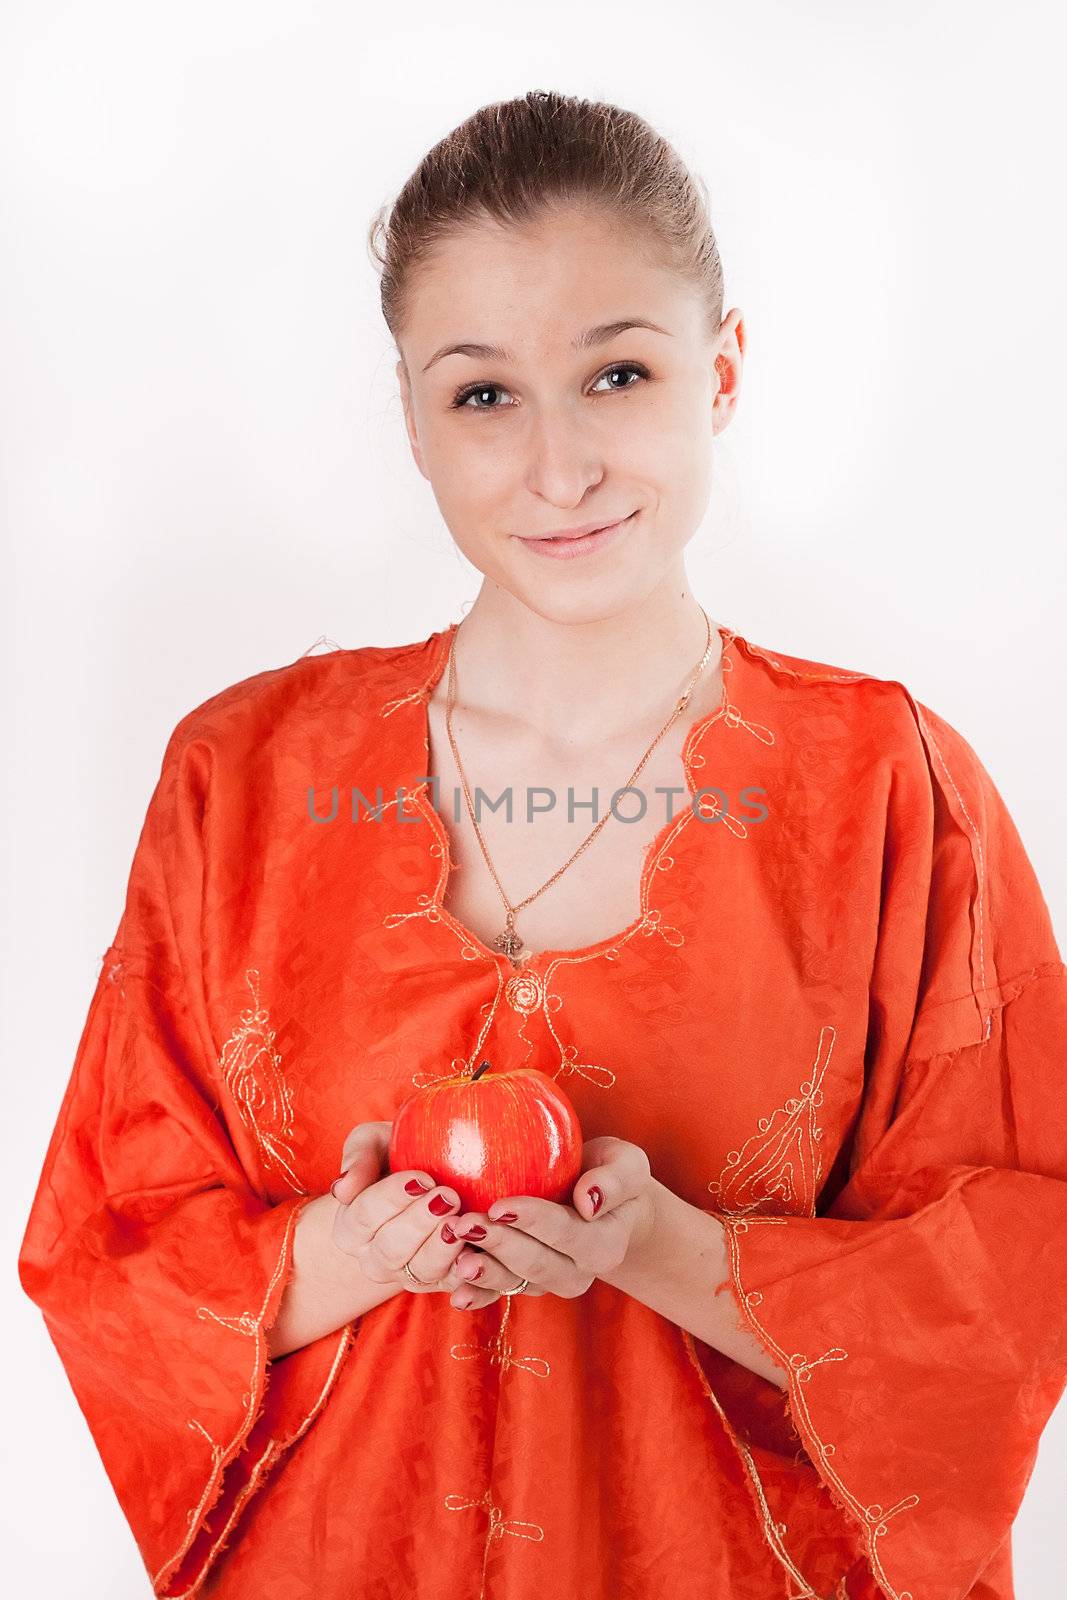 Girl in orange dress offers a red apple  by victosha